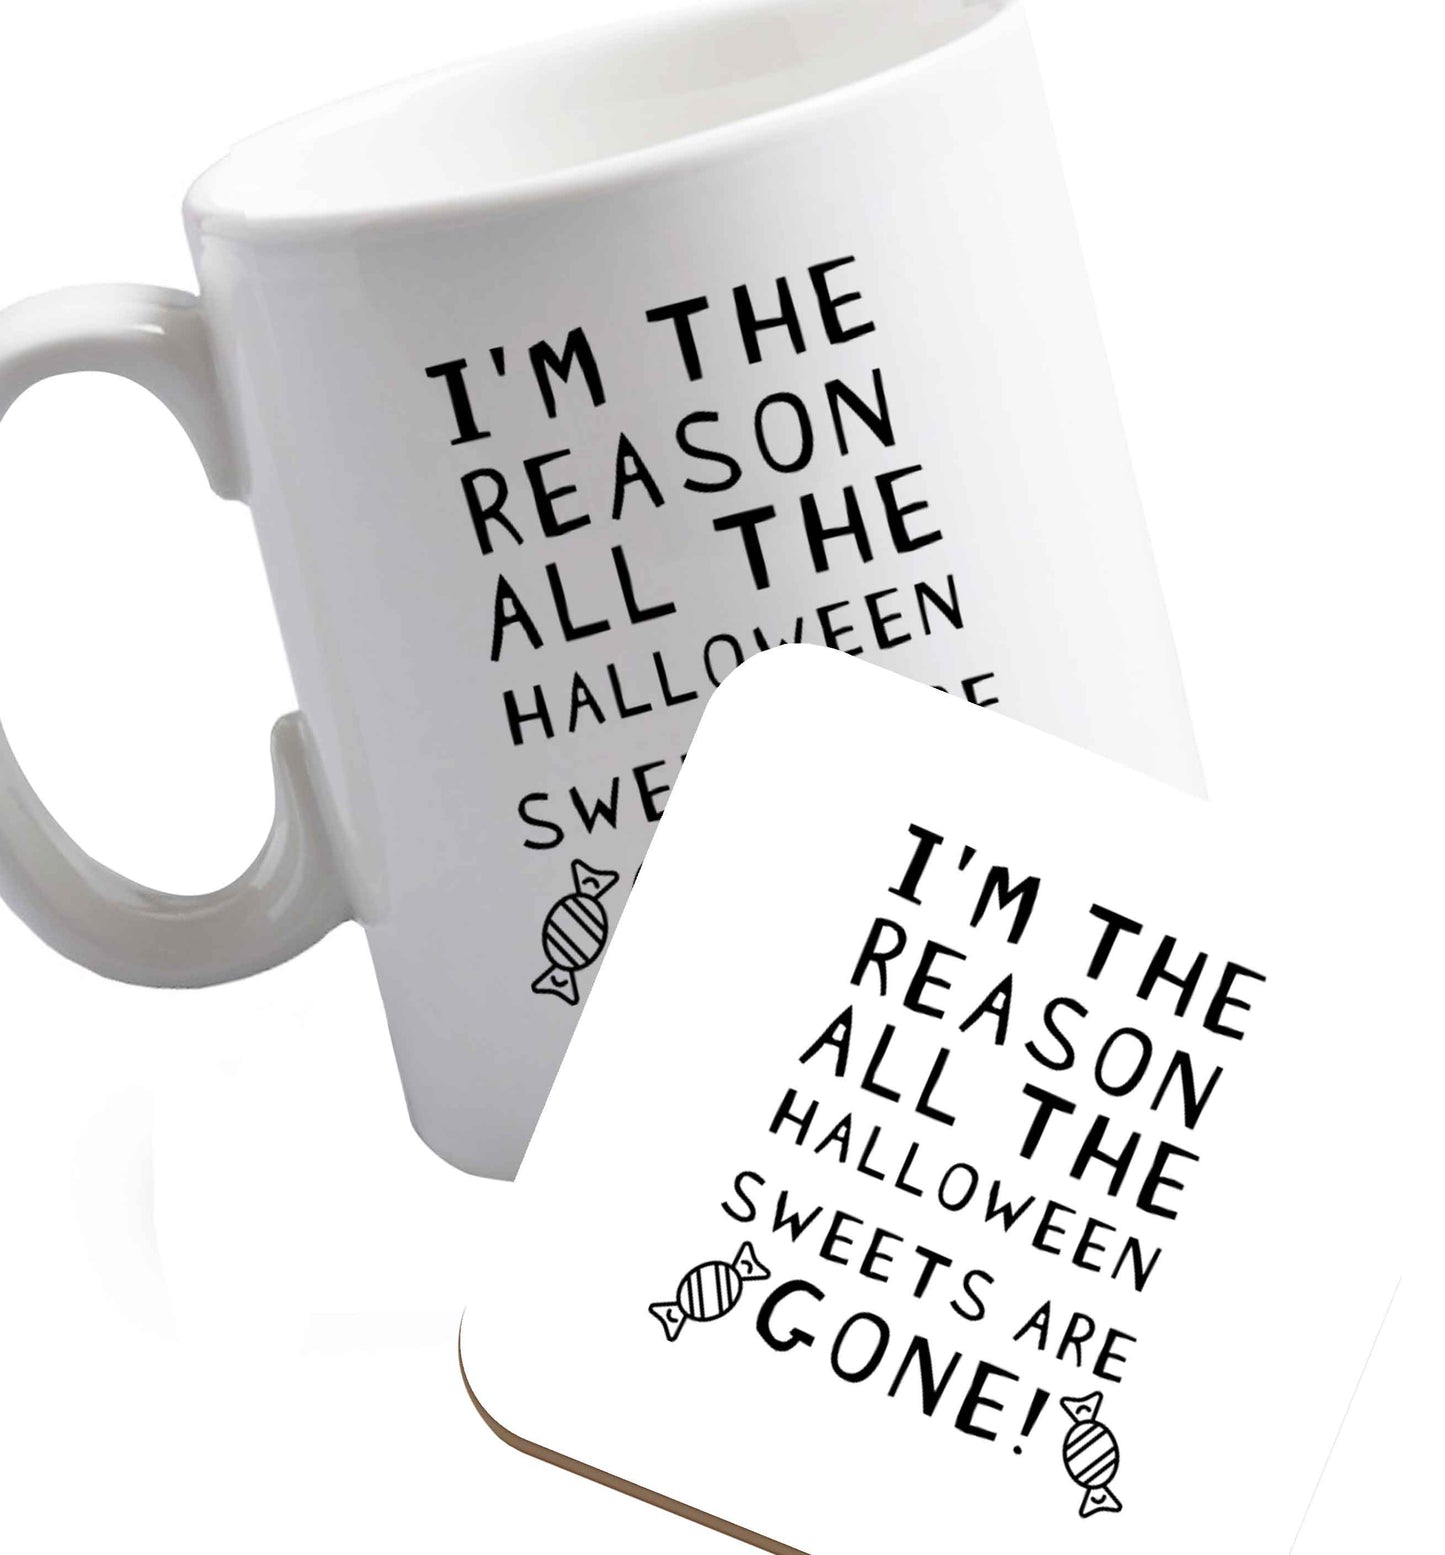 10 oz I'm the reason all of the halloween sweets are gone ceramic mug and coaster set right handed